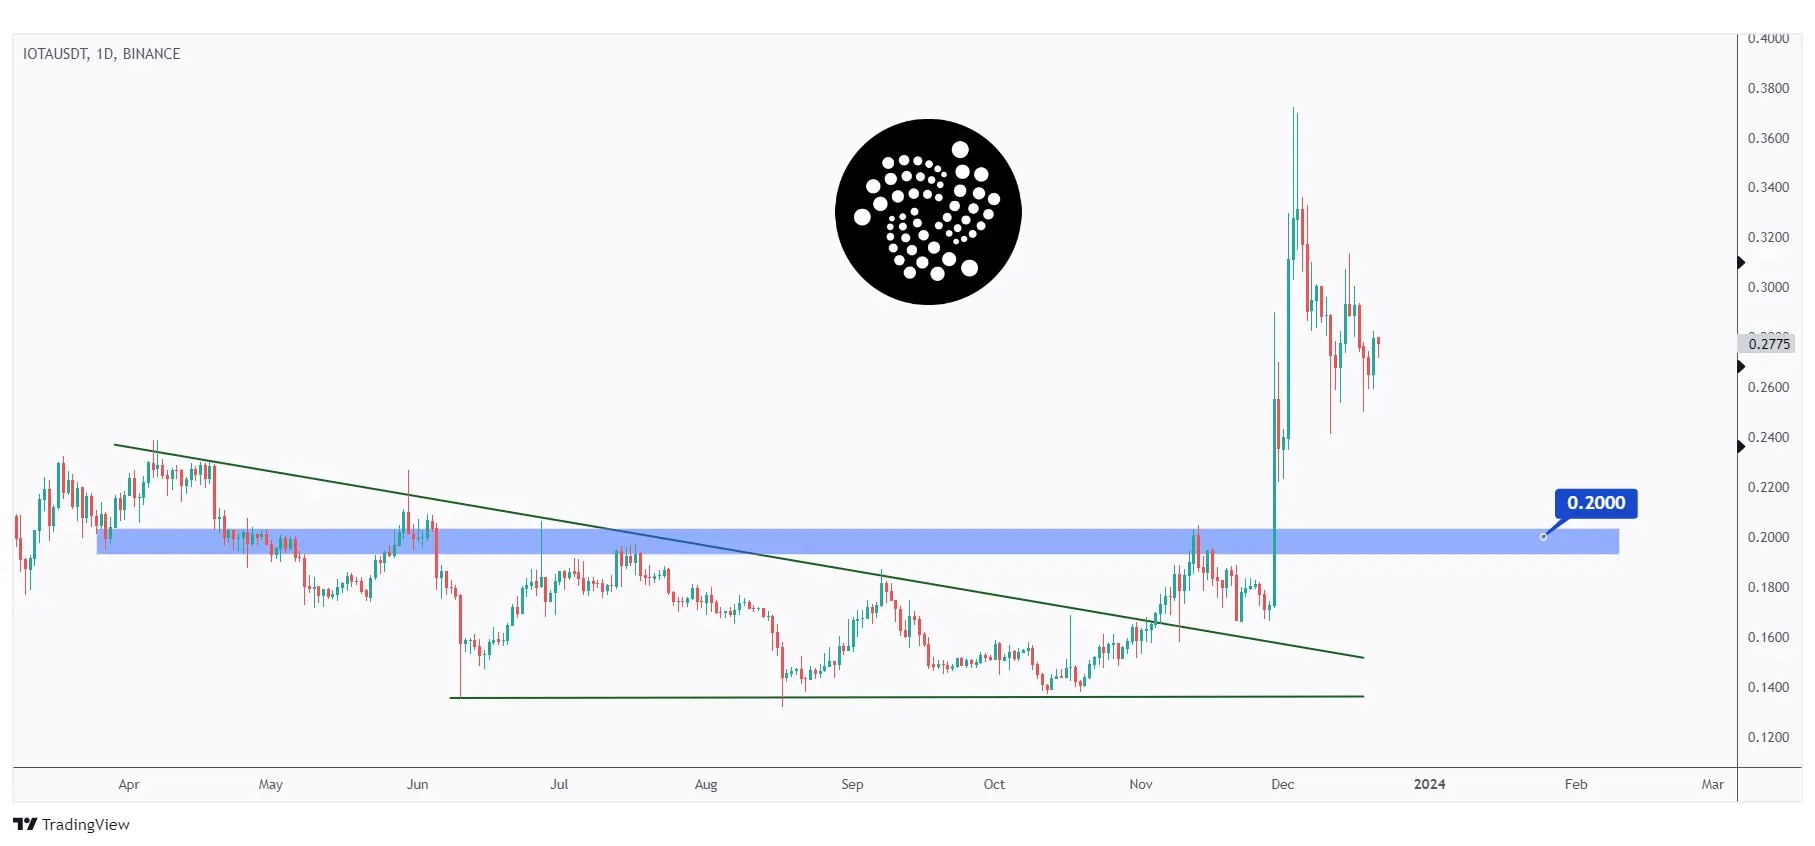 IOTA Daily chart, after a 110% surge, it is currently in a correction phase